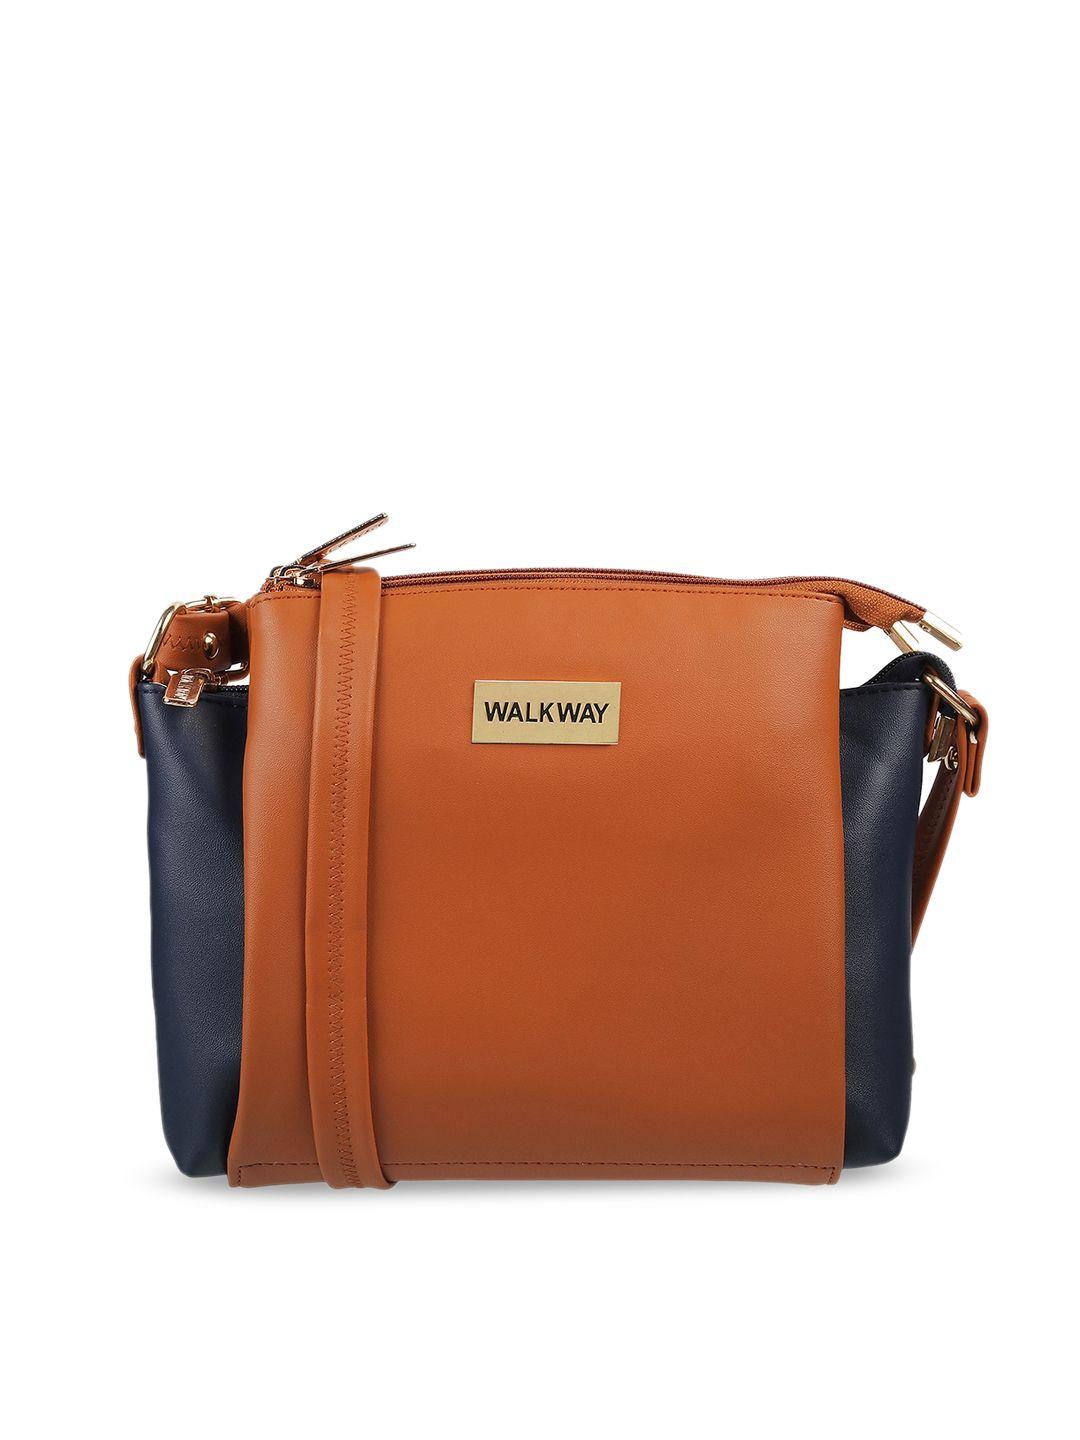 walkway by metro tan colourblocked structured sling bag